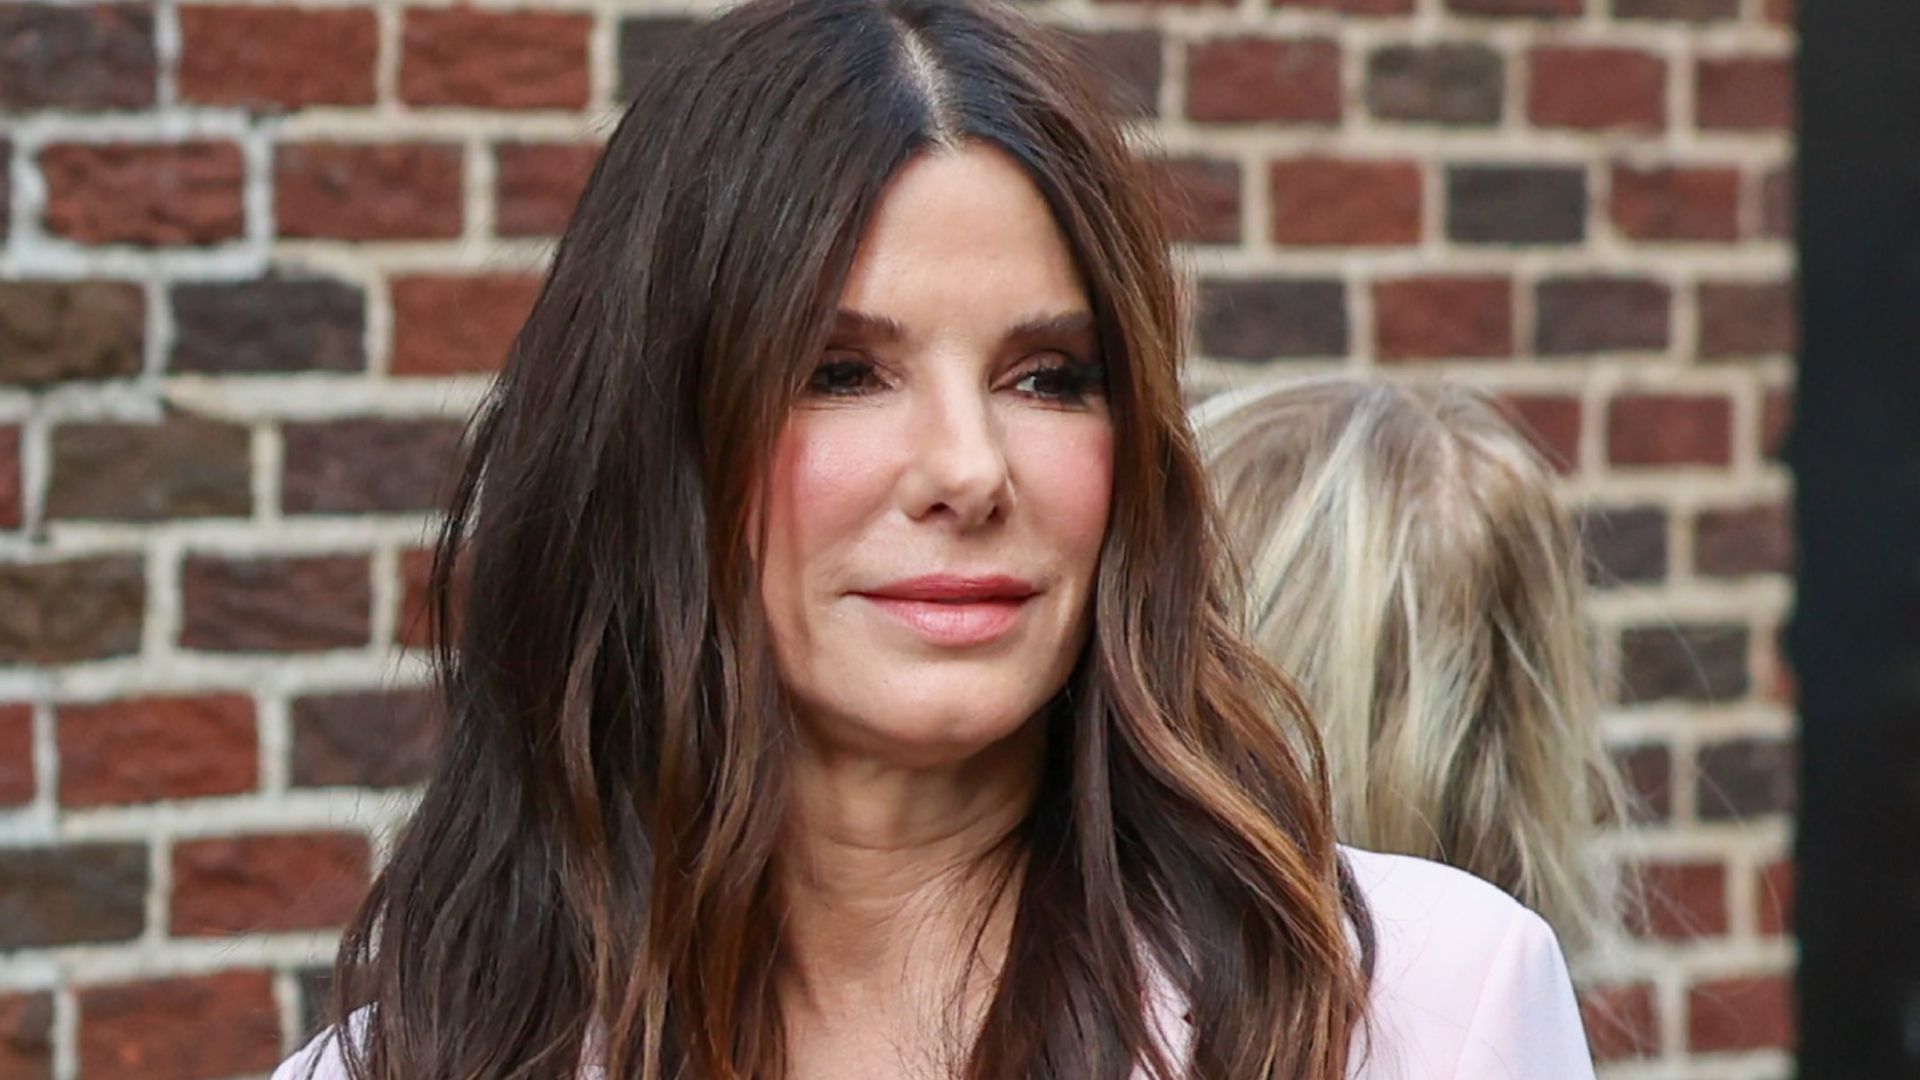 Sandra Bullock opens up about the family match with unexpected ending on live TV